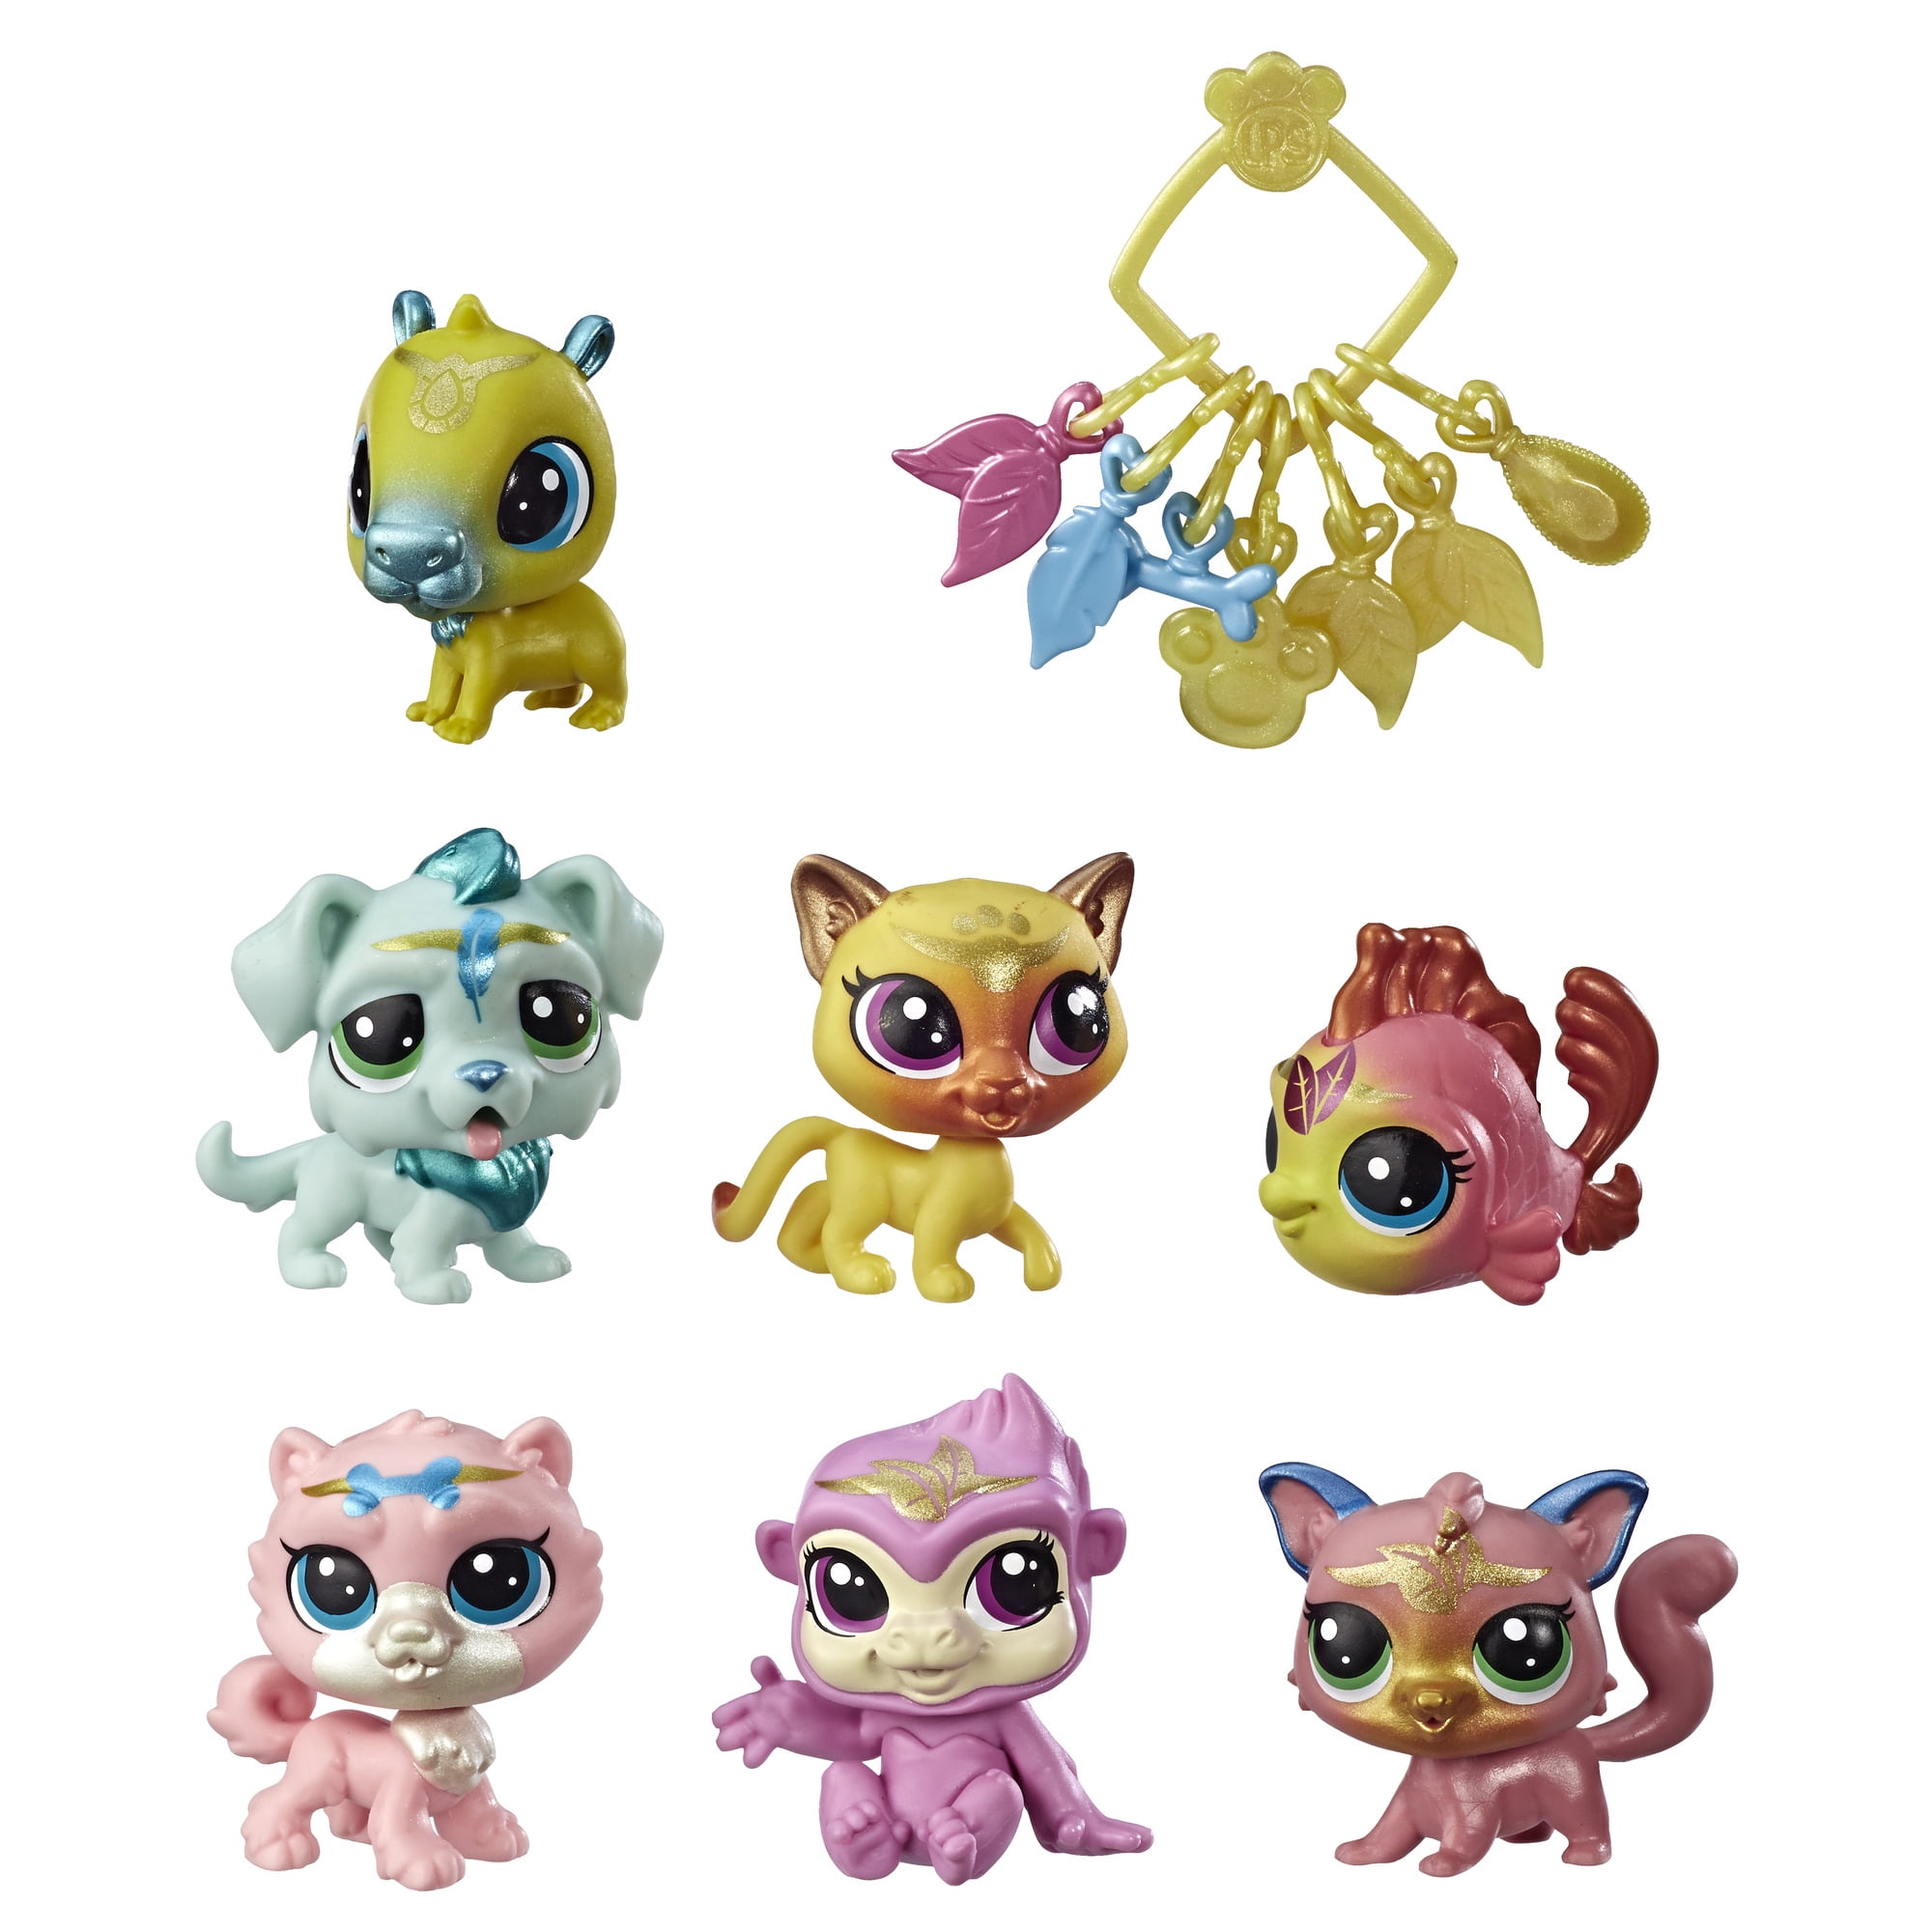 where can i buy lps toys